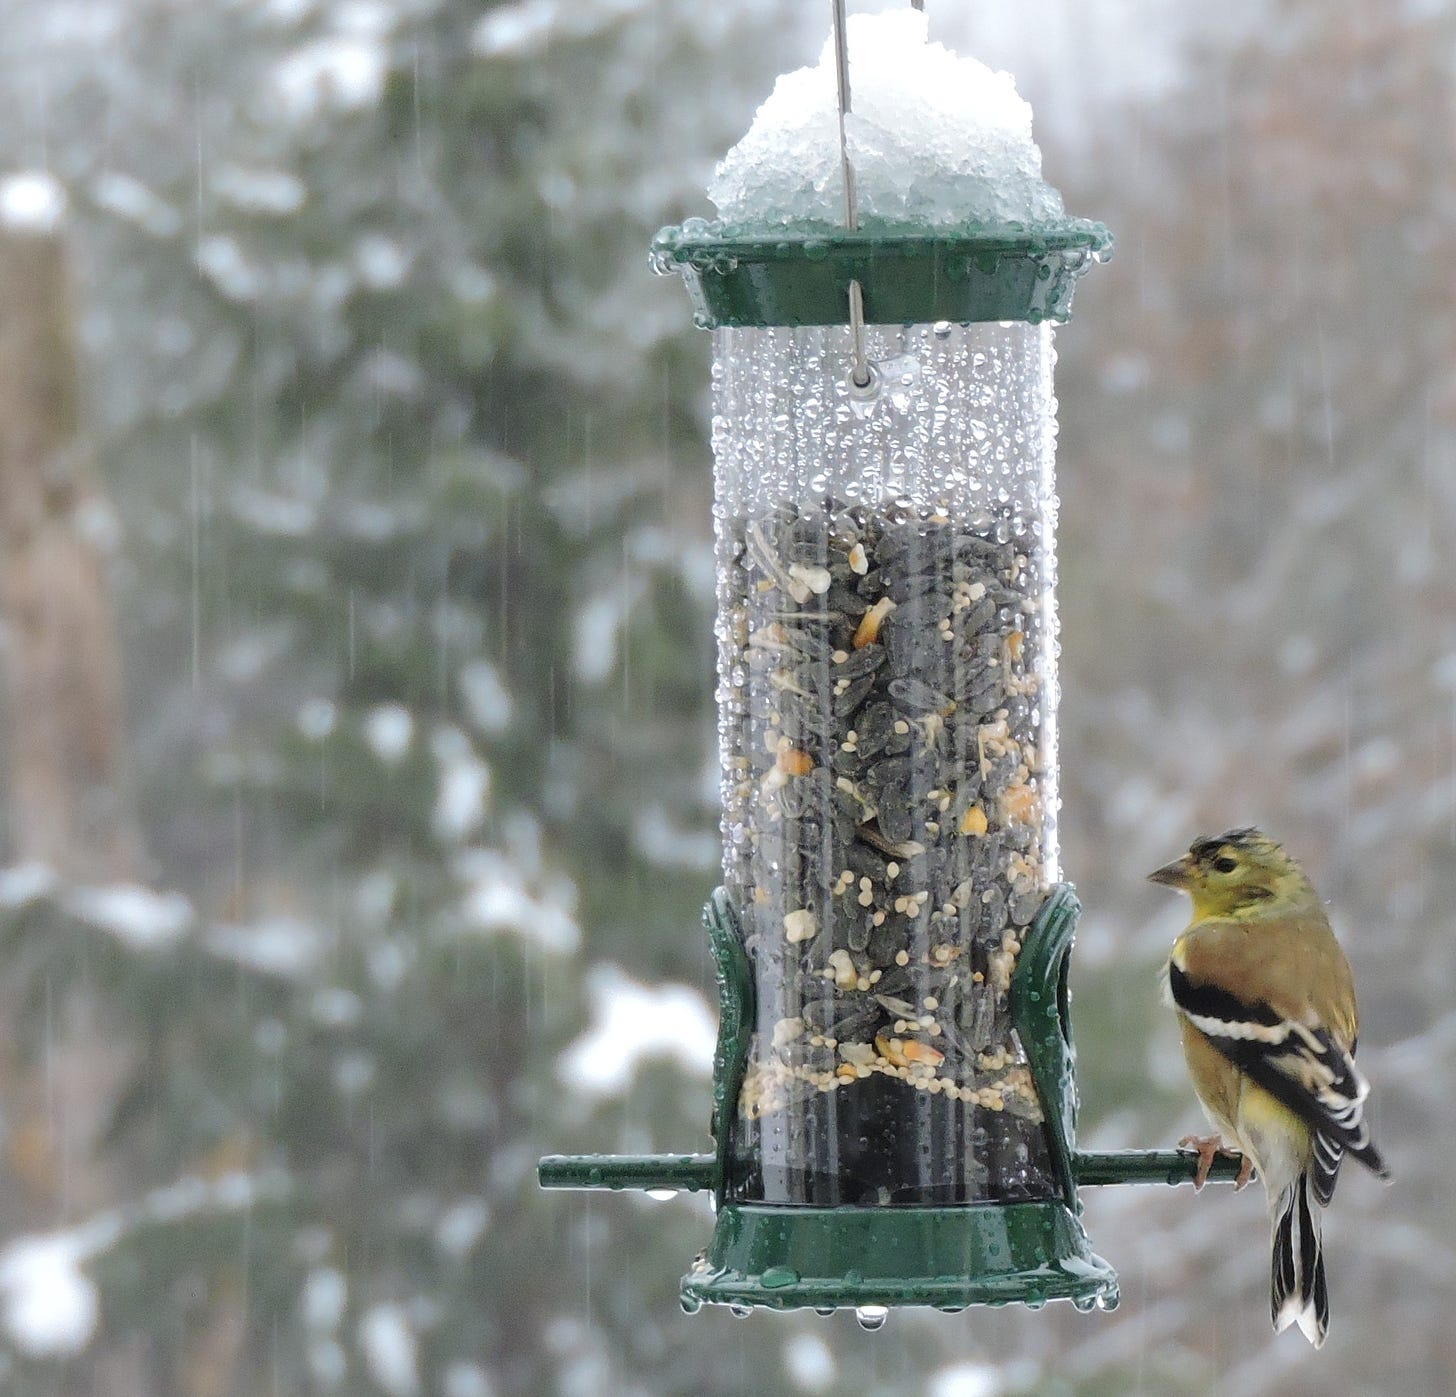 A goldfinch looking stoic at the feeder on a snowy day